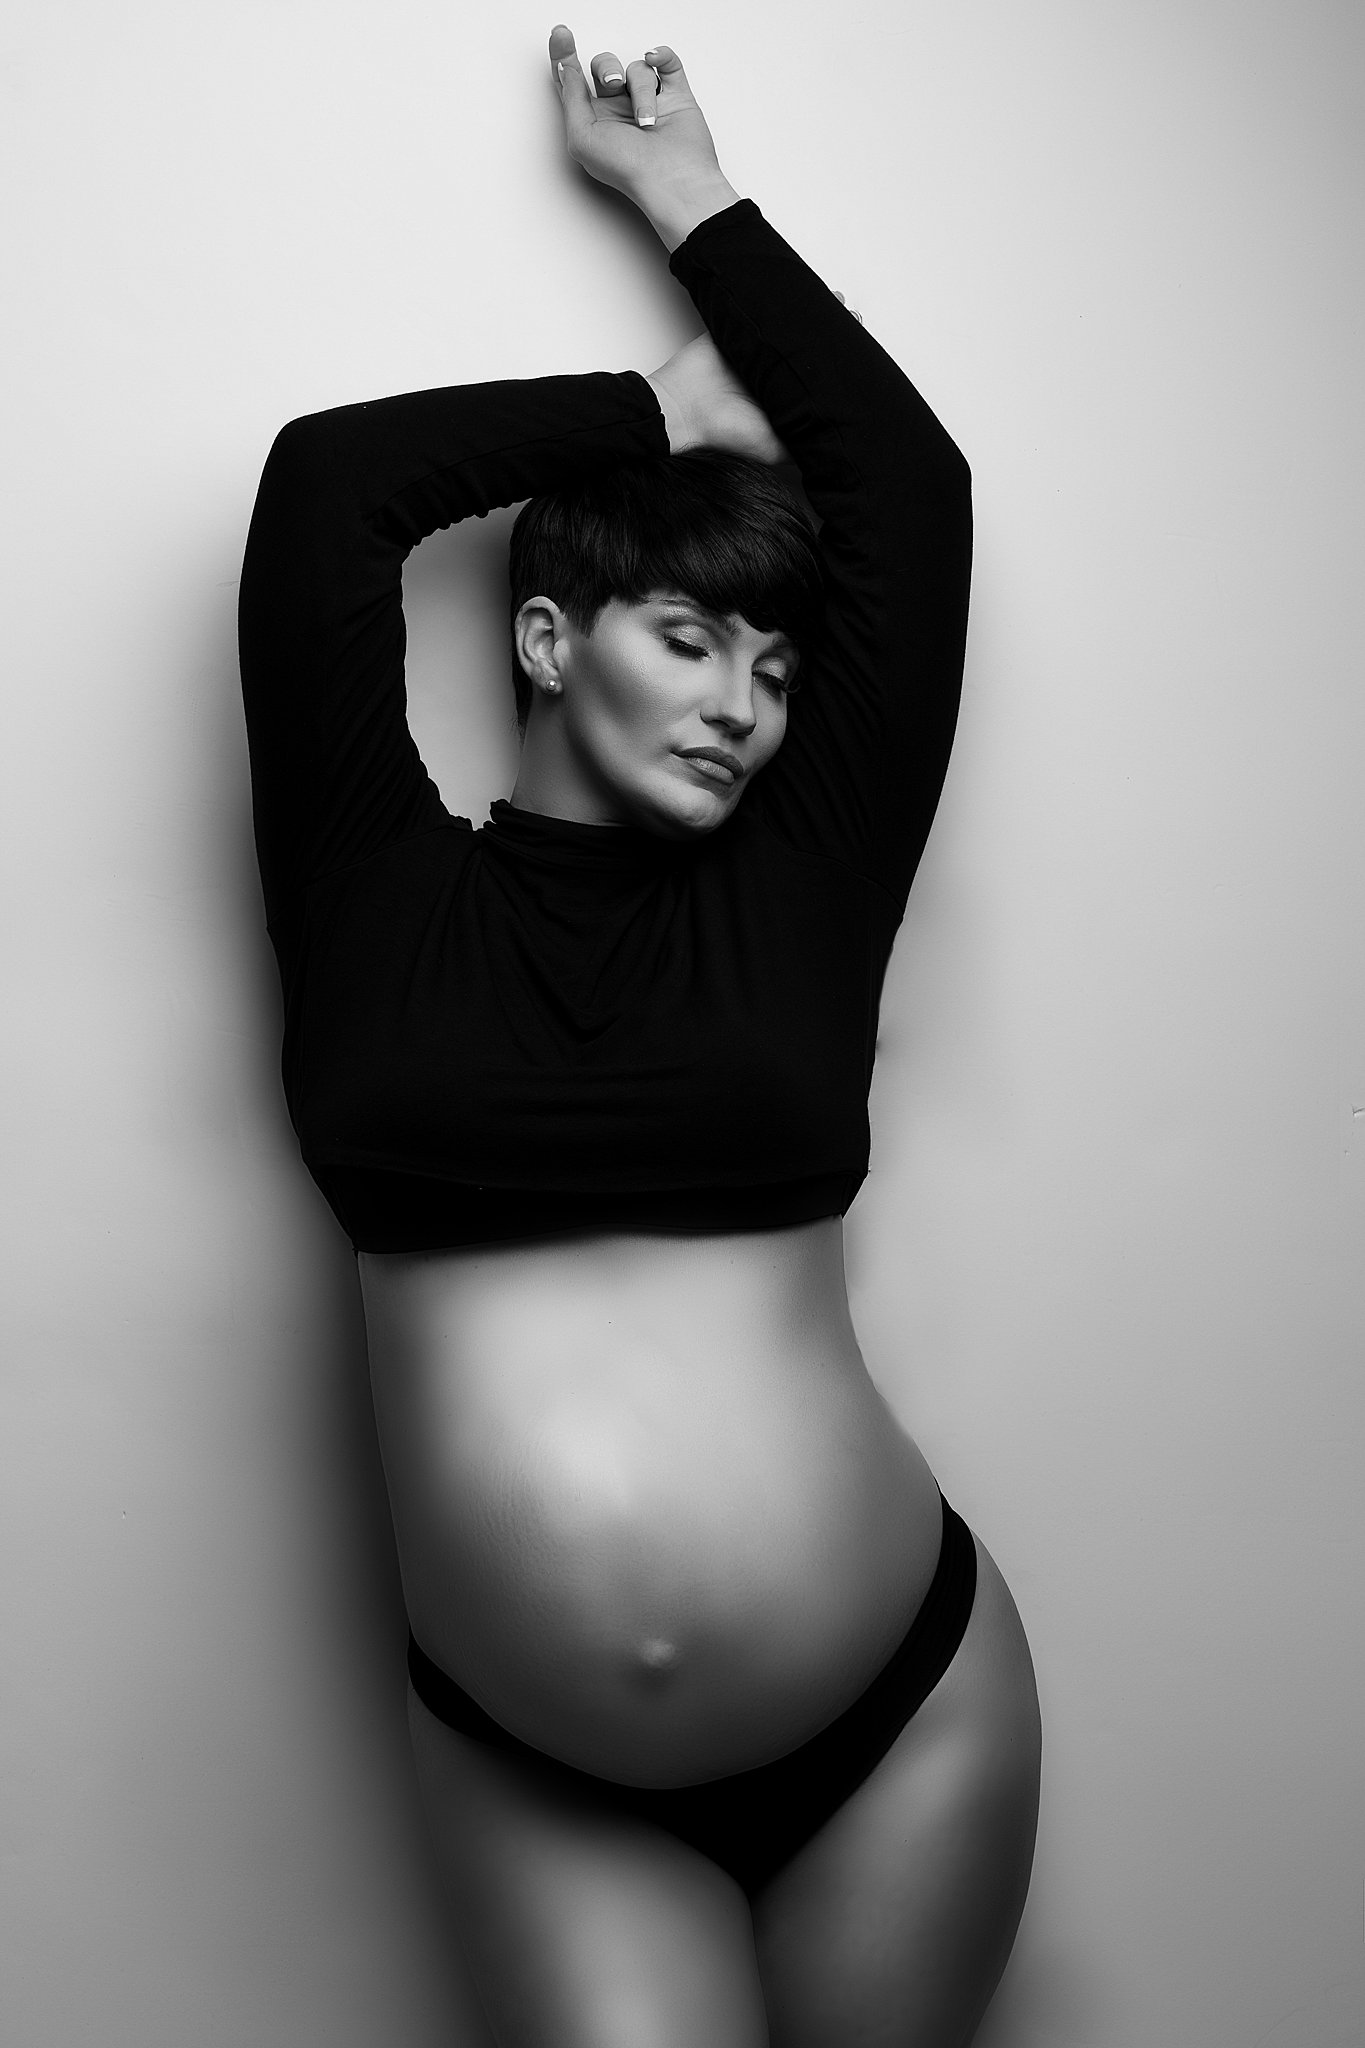 A mother to be stands against a white wall wearing a black top and underwear with her belly exposed and hands above her head moonlight midwifery